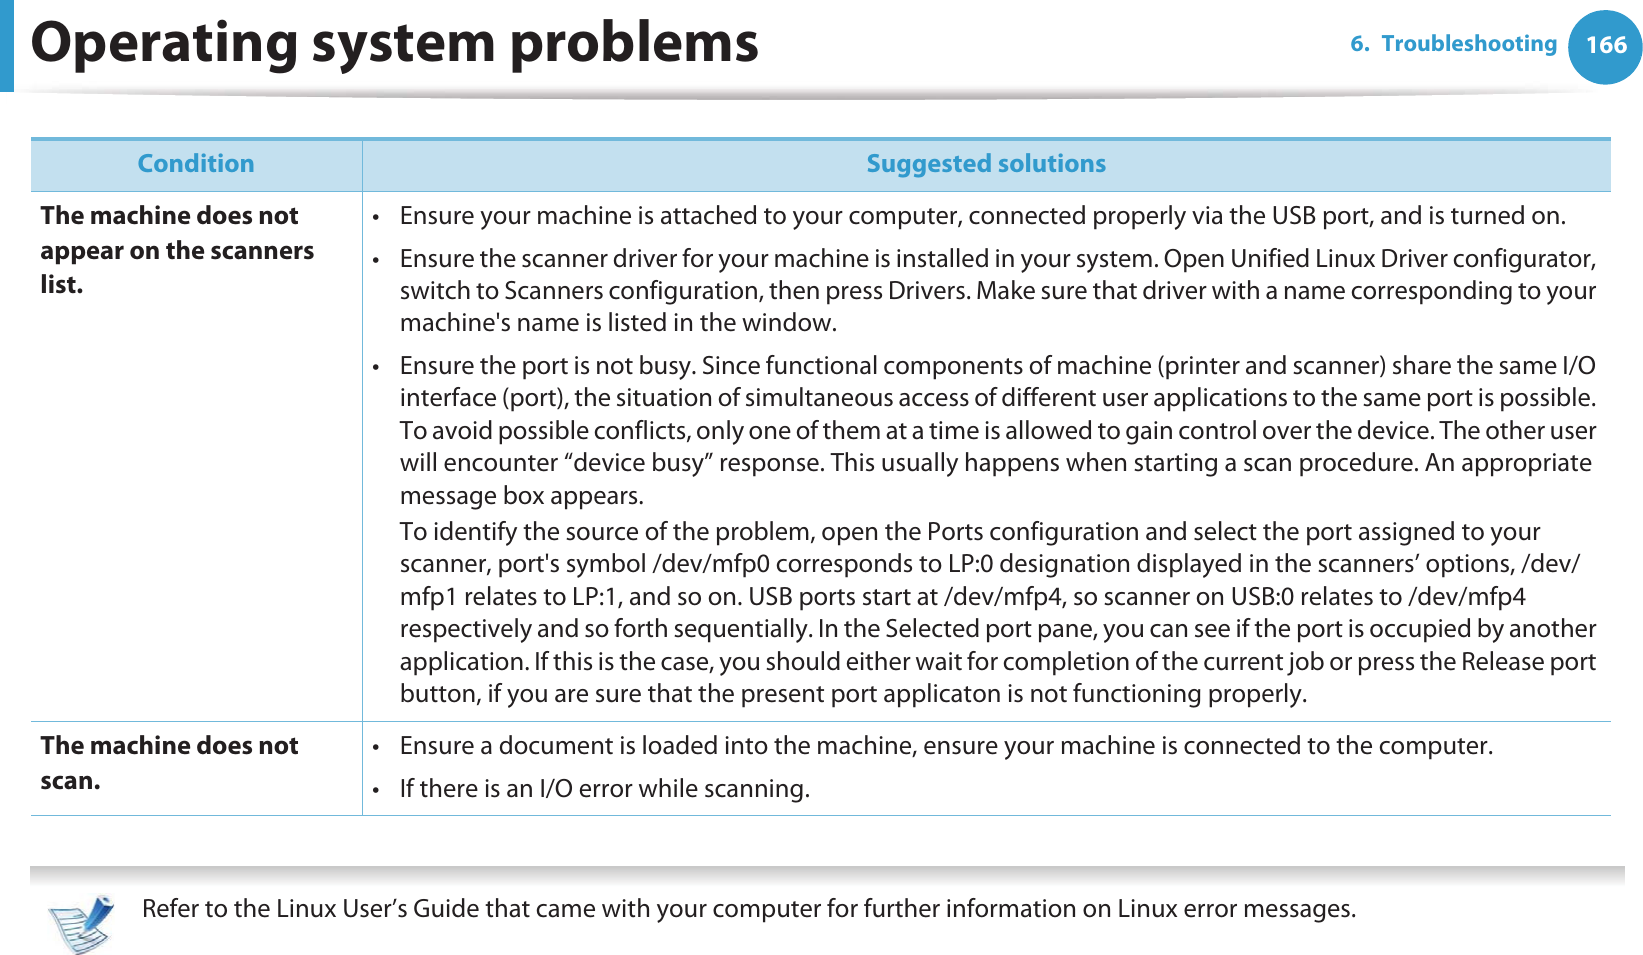 Operating system problems 1666. Troubleshooting  Refer to the Linux User’s Guide that came with your computer for further information on Linux error messages. The machine does not appear on the scanners list.• Ensure your machine is attached to your computer, connected properly via the USB port, and is turned on.• Ensure the scanner driver for your machine is installed in your system. Open Unified Linux Driver configurator, switch to Scanners configuration, then press Drivers. Make sure that driver with a name corresponding to your machine&apos;s name is listed in the window. • Ensure the port is not busy. Since functional components of machine (printer and scanner) share the same I/O interface (port), the situation of simultaneous access of different user applications to the same port is possible. To avoid possible conflicts, only one of them at a time is allowed to gain control over the device. The other user will encounter “device busy” response. This usually happens when starting a scan procedure. An appropriate message box appears.To identify the source of the problem, open the Ports configuration and select the port assigned to your scanner, port&apos;s symbol /dev/mfp0 corresponds to LP:0 designation displayed in the scanners’ options, /dev/mfp1 relates to LP:1, and so on. USB ports start at /dev/mfp4, so scanner on USB:0 relates to /dev/mfp4 respectively and so forth sequentially. In the Selected port pane, you can see if the port is occupied by another application. If this is the case, you should either wait for completion of the current job or press the Release port button, if you are sure that the present port applicaton is not functioning properly.The machine does not scan.• Ensure a document is loaded into the machine, ensure your machine is connected to the computer.• If there is an I/O error while scanning.Condition Suggested solutions